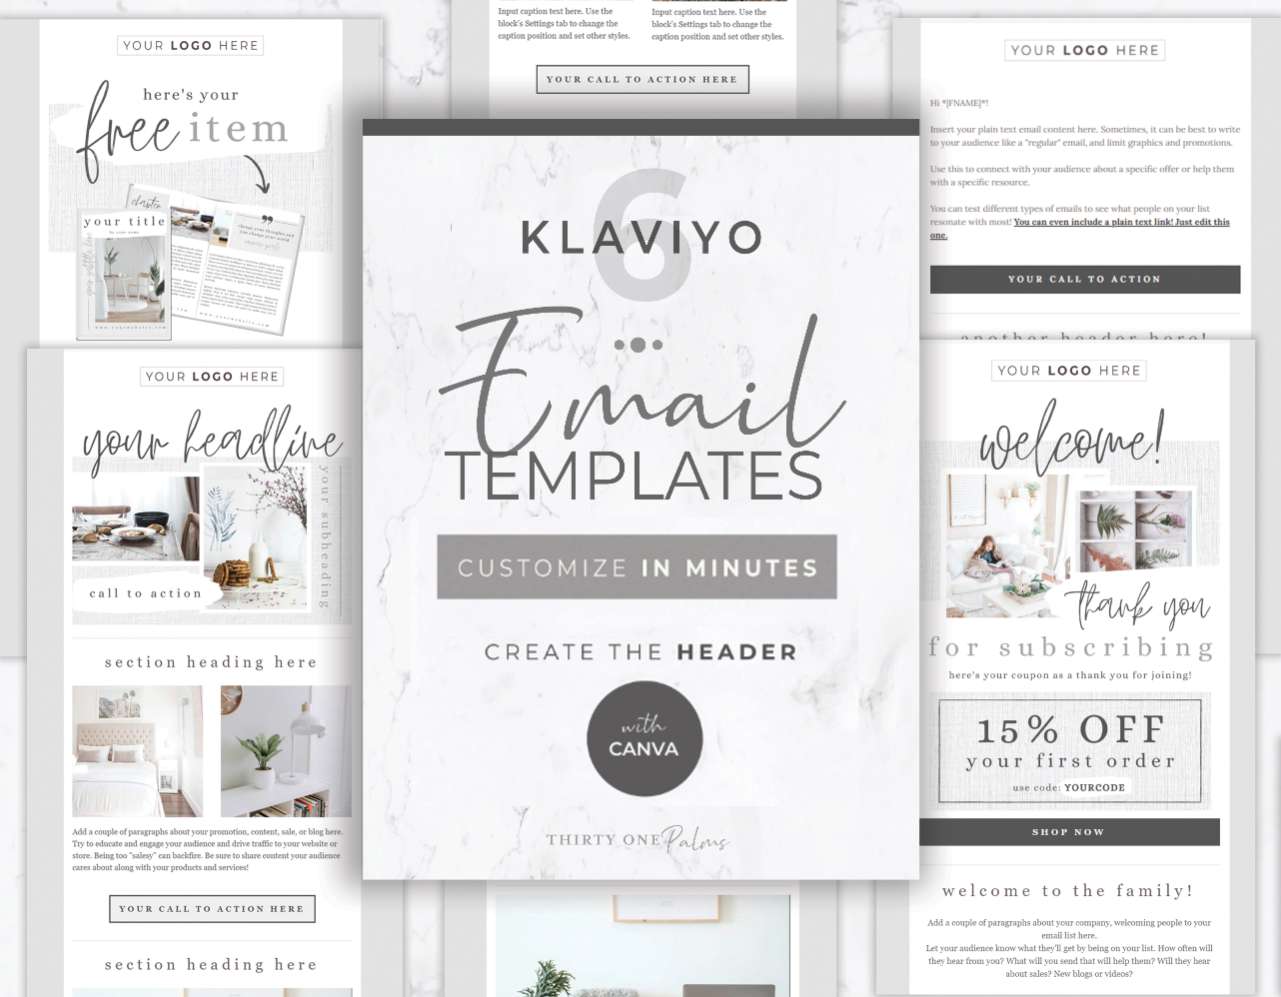 Email Template for Canva & Klaviyo – 6 Pack – White Linen